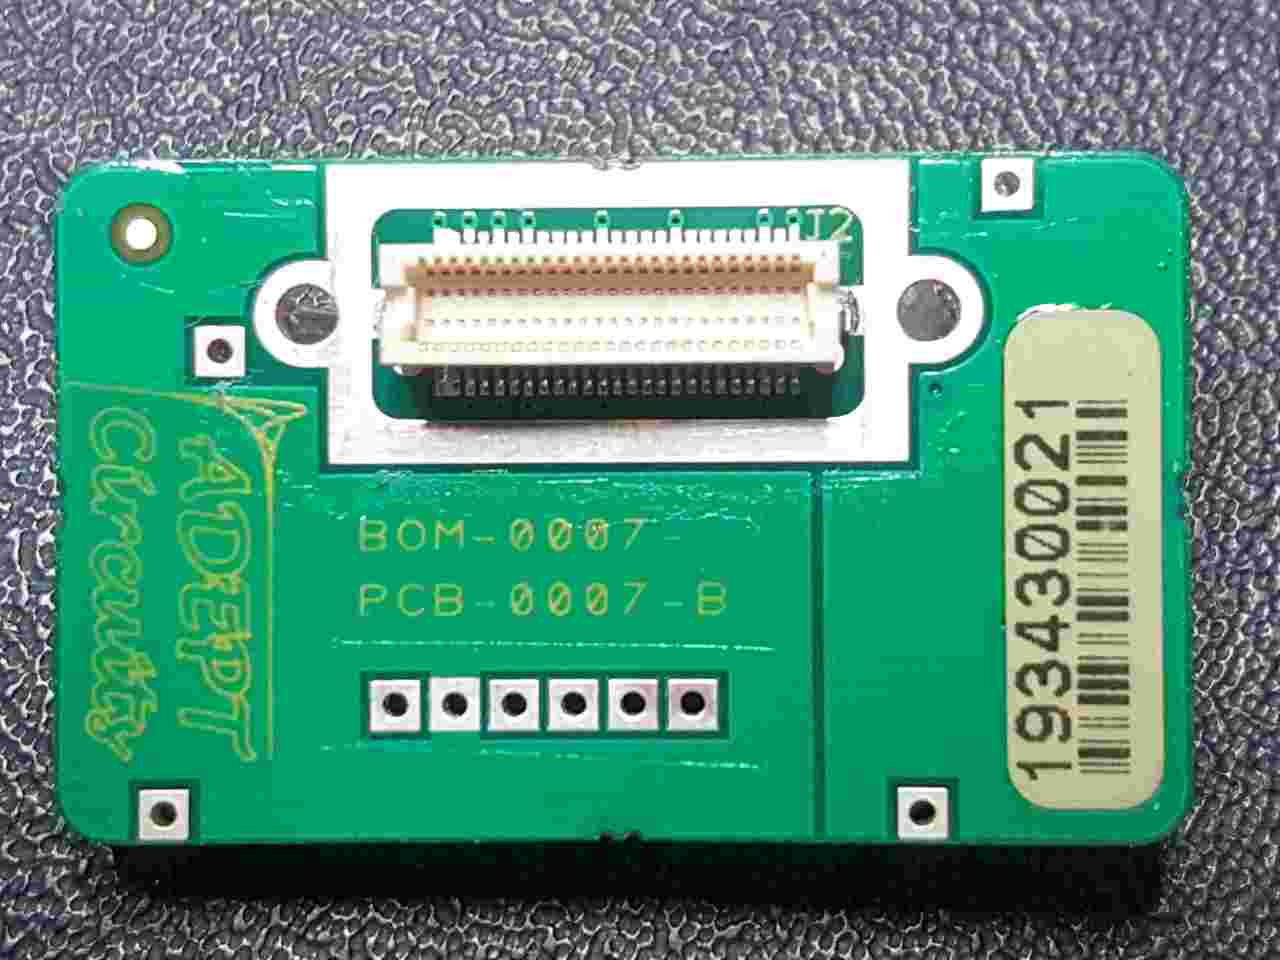 Infrared Camera Adaptor printed circuit board with  single high density 50 pin connector

type Hirose DF12-50DS-0.5V(86)